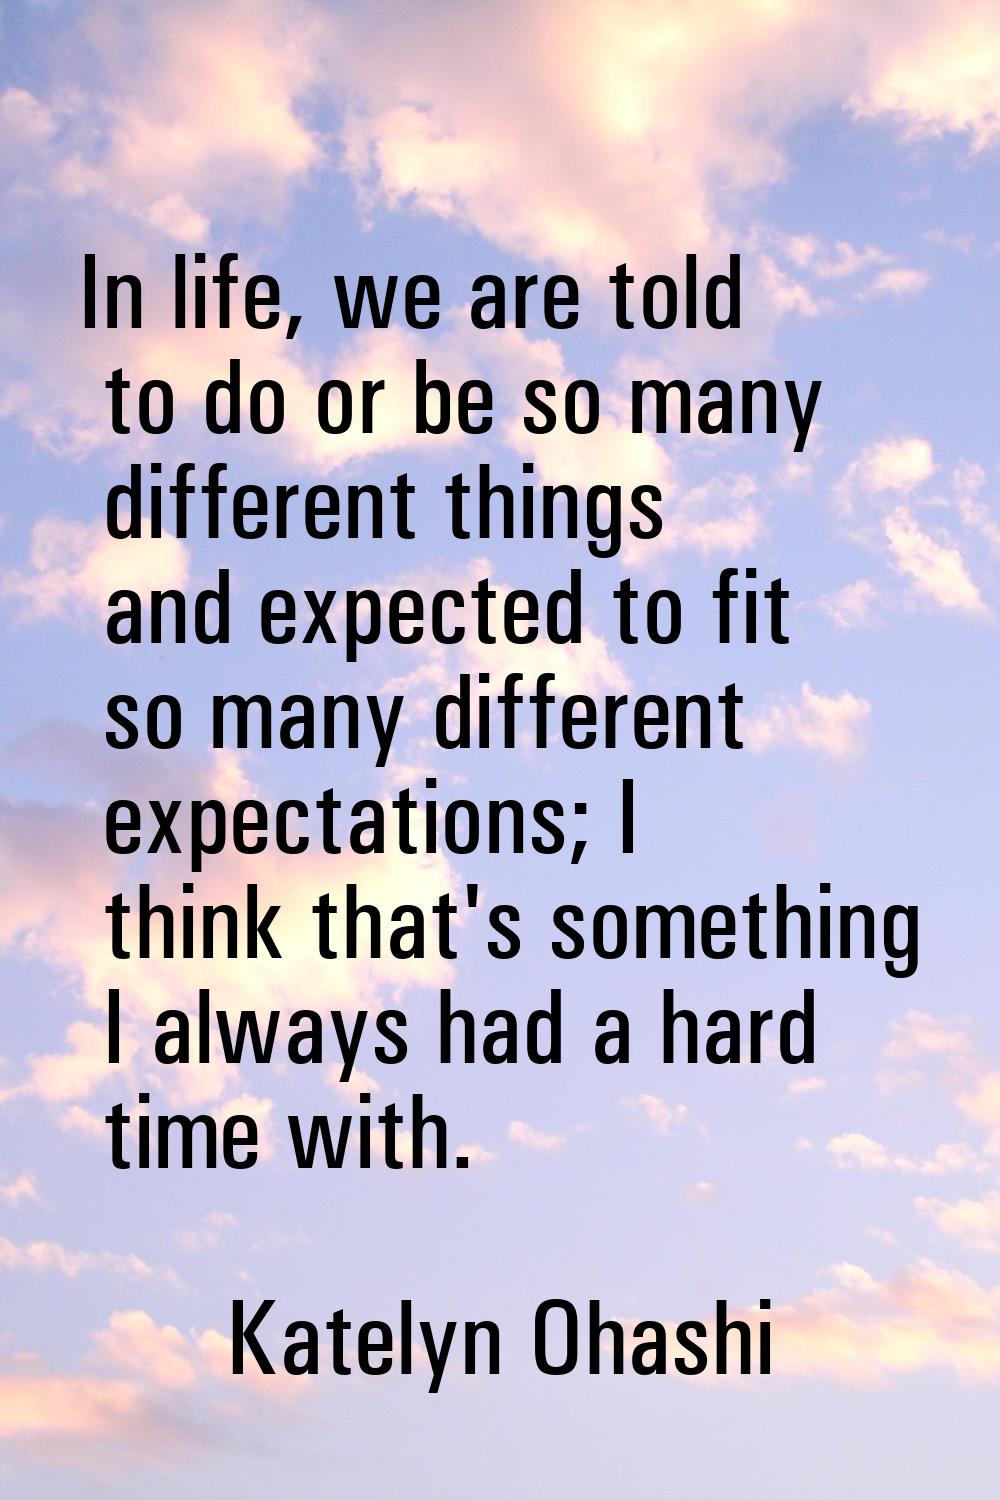 In life, we are told to do or be so many different things and expected to fit so many different exp